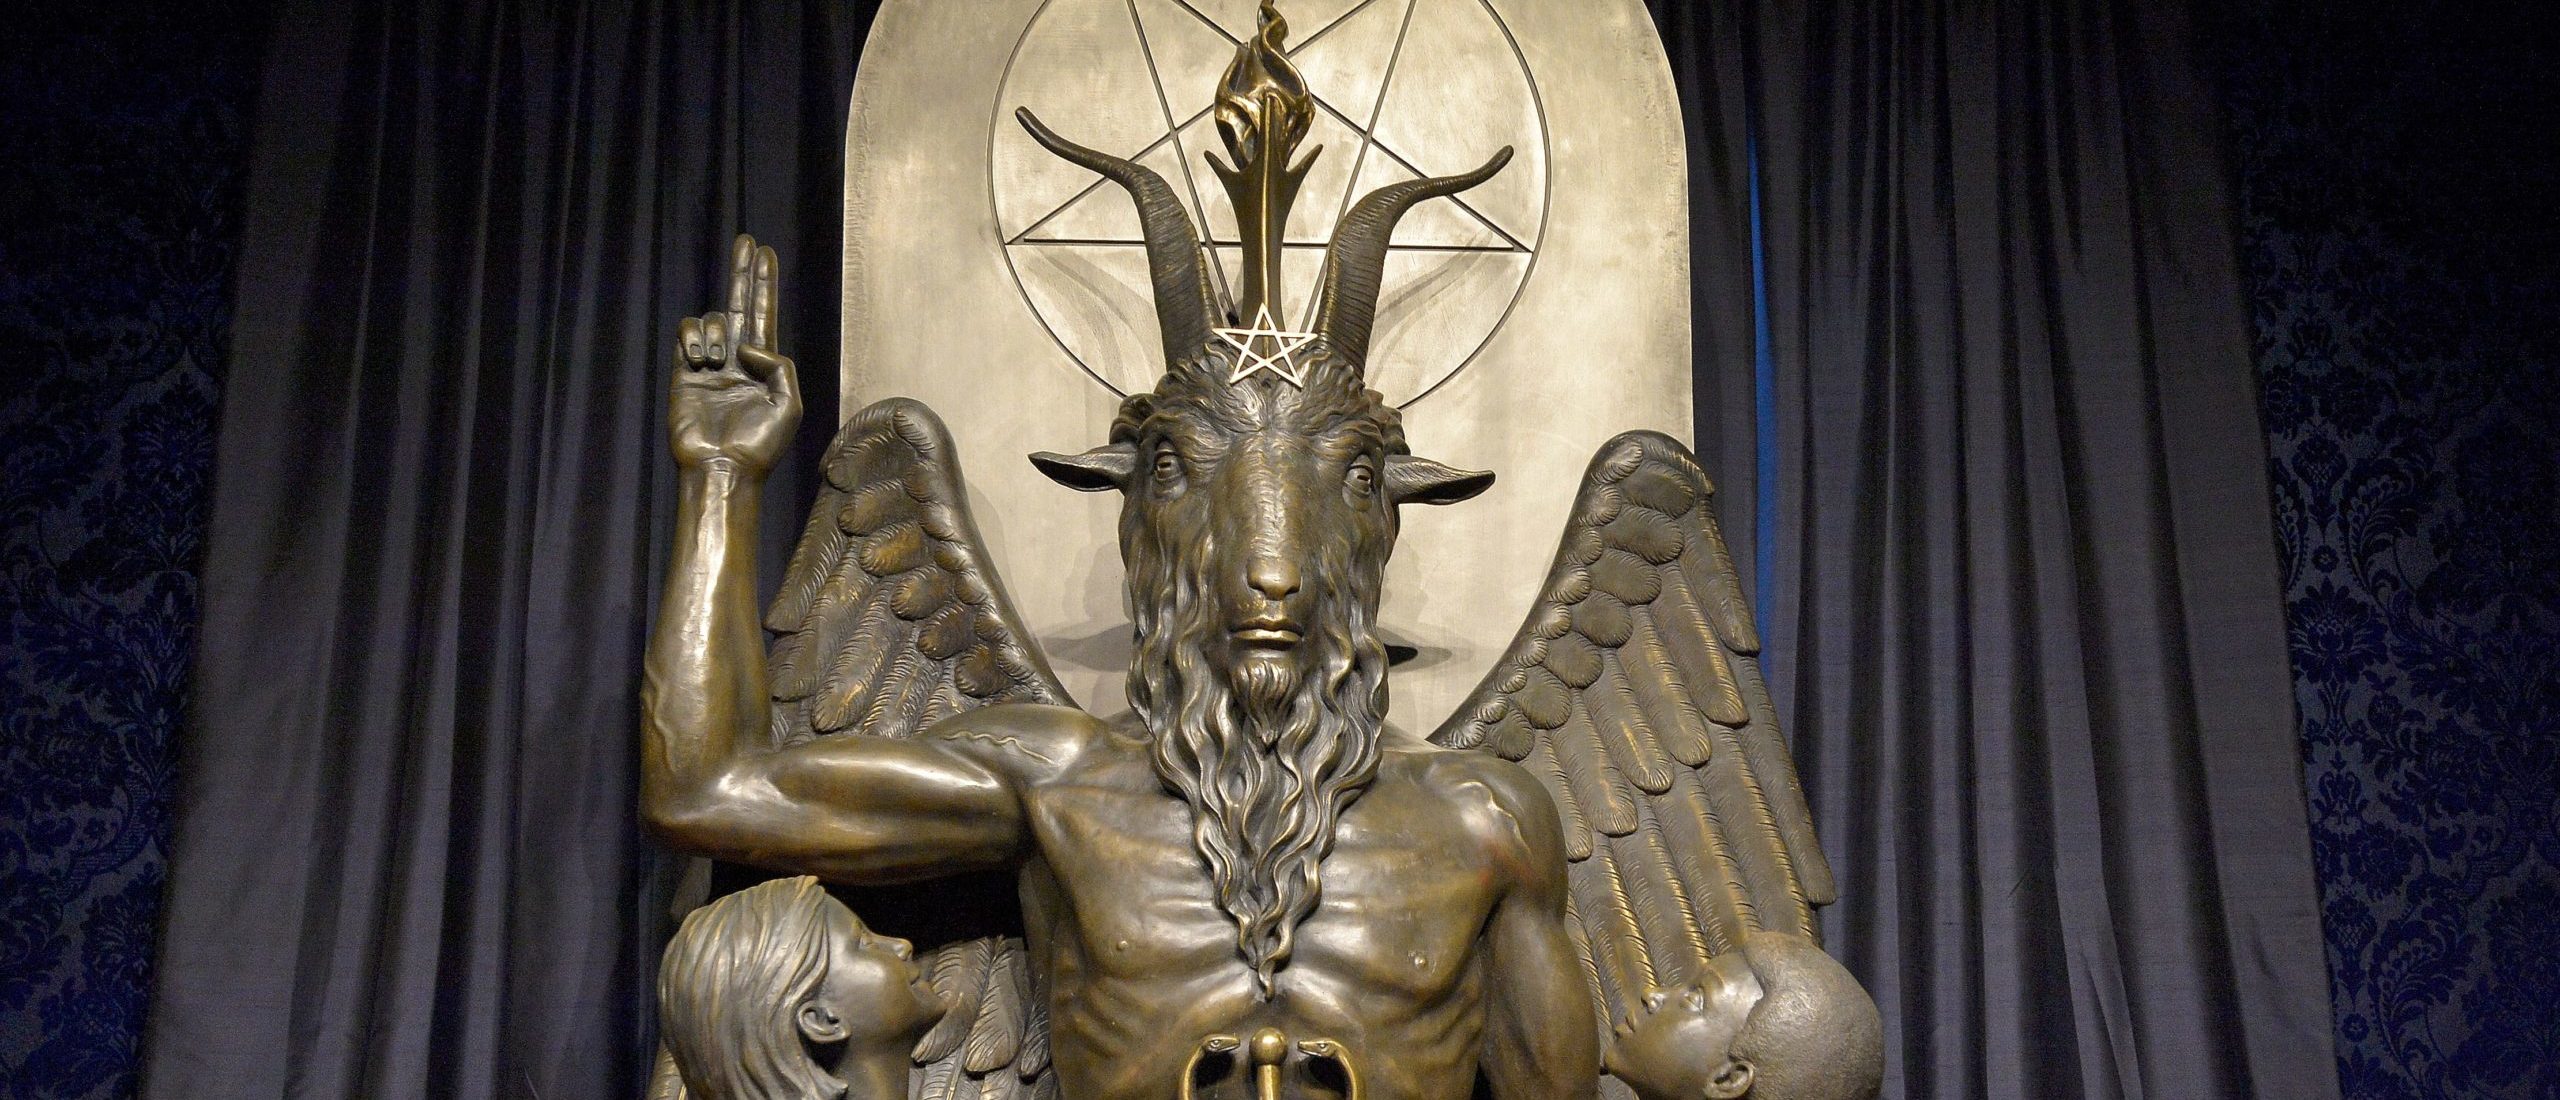 The Baphomet statue is seen in the conversion room at the Satanic Temple where a "Hell House" is being held in Salem, Massachusett on October 8, 2019. - The Hell House was a parody on a Christian Conversion centre meant to scare atheist and other Satanic Church members. (Photo by Joseph Prezioso / AFP) (Photo by JOSEPH PREZIOSO/AFP via Getty Images) Note: The display in the image above is not the display mentioned in the story.